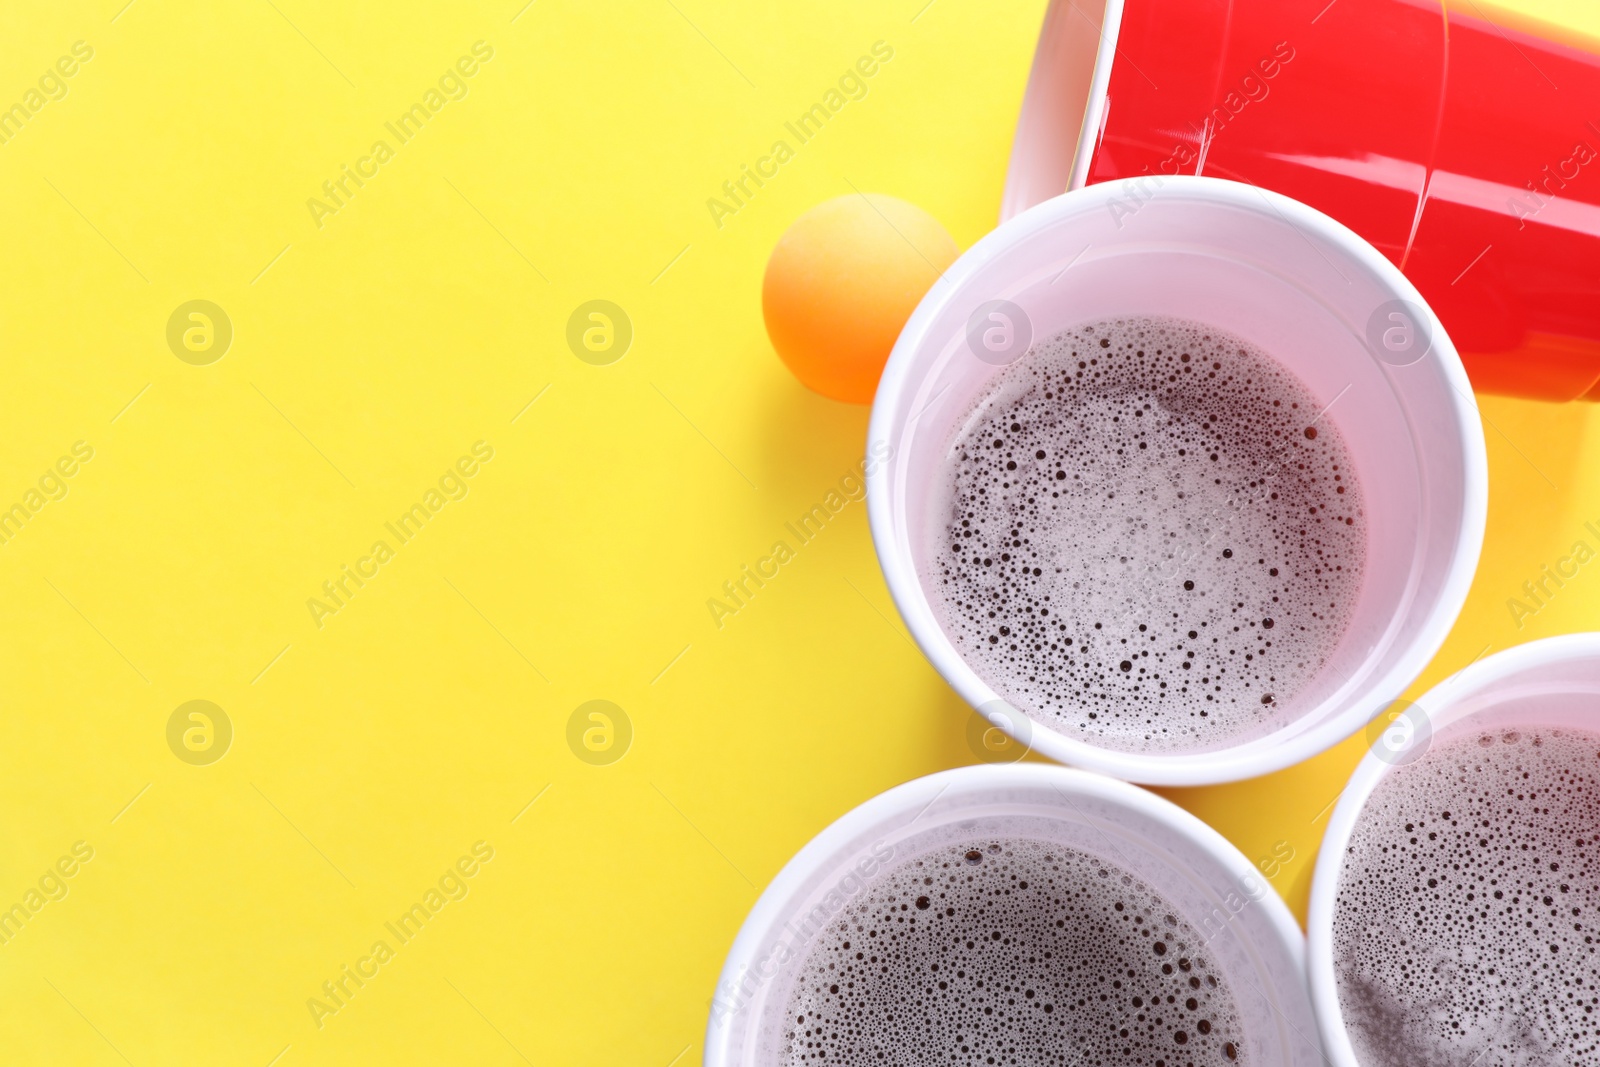 Photo of Plastic cups and ball on yellow background, flat lay with space for text. Beer pong game